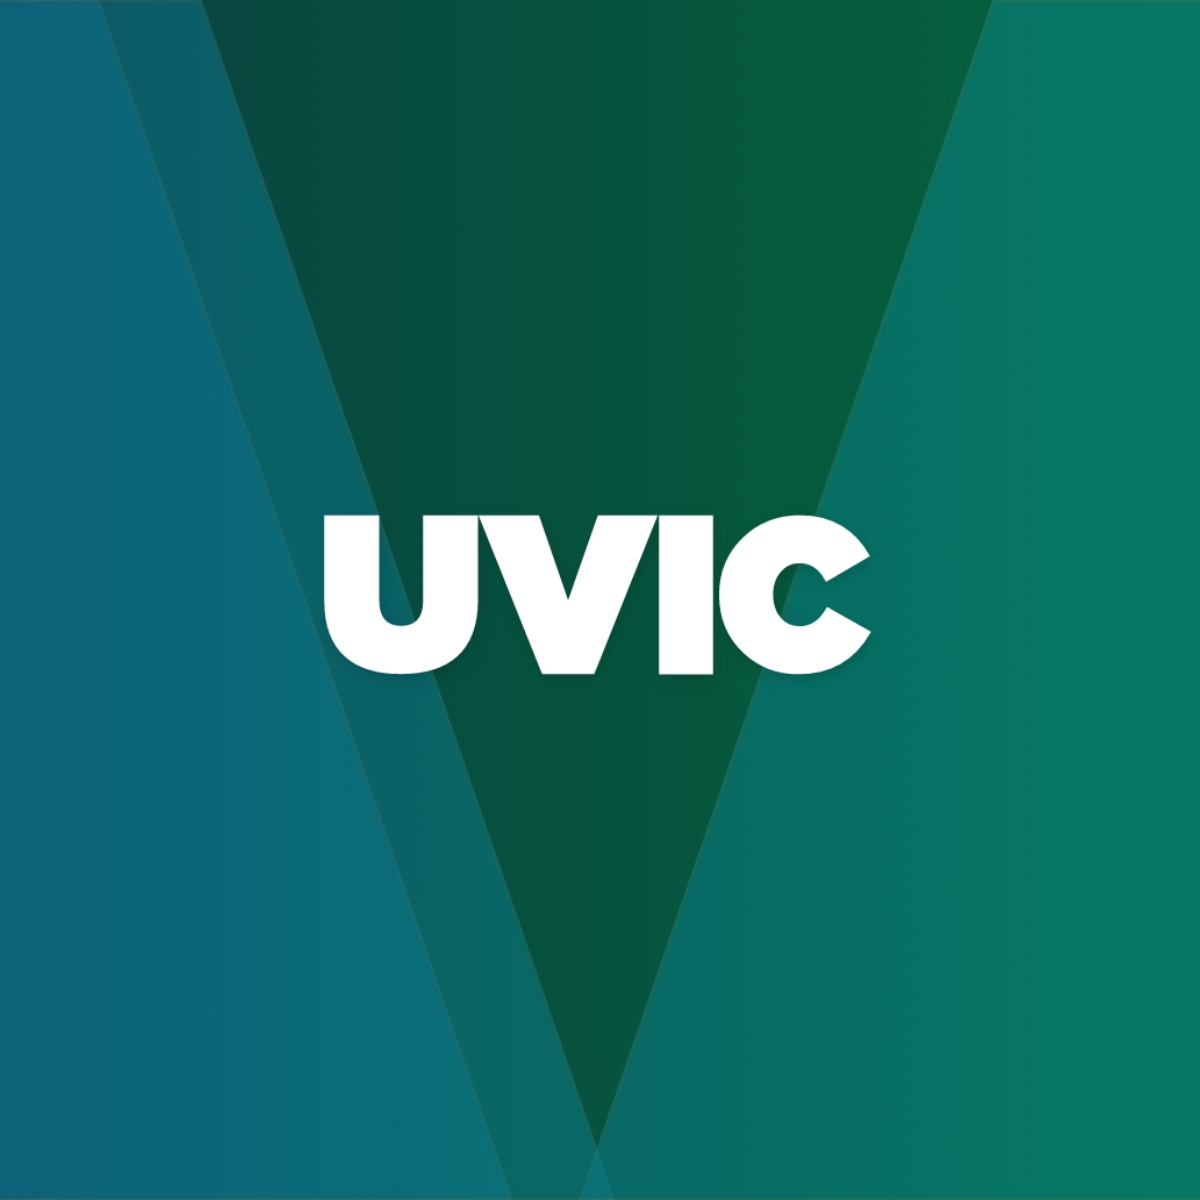 uvic feature2 - Purica V2